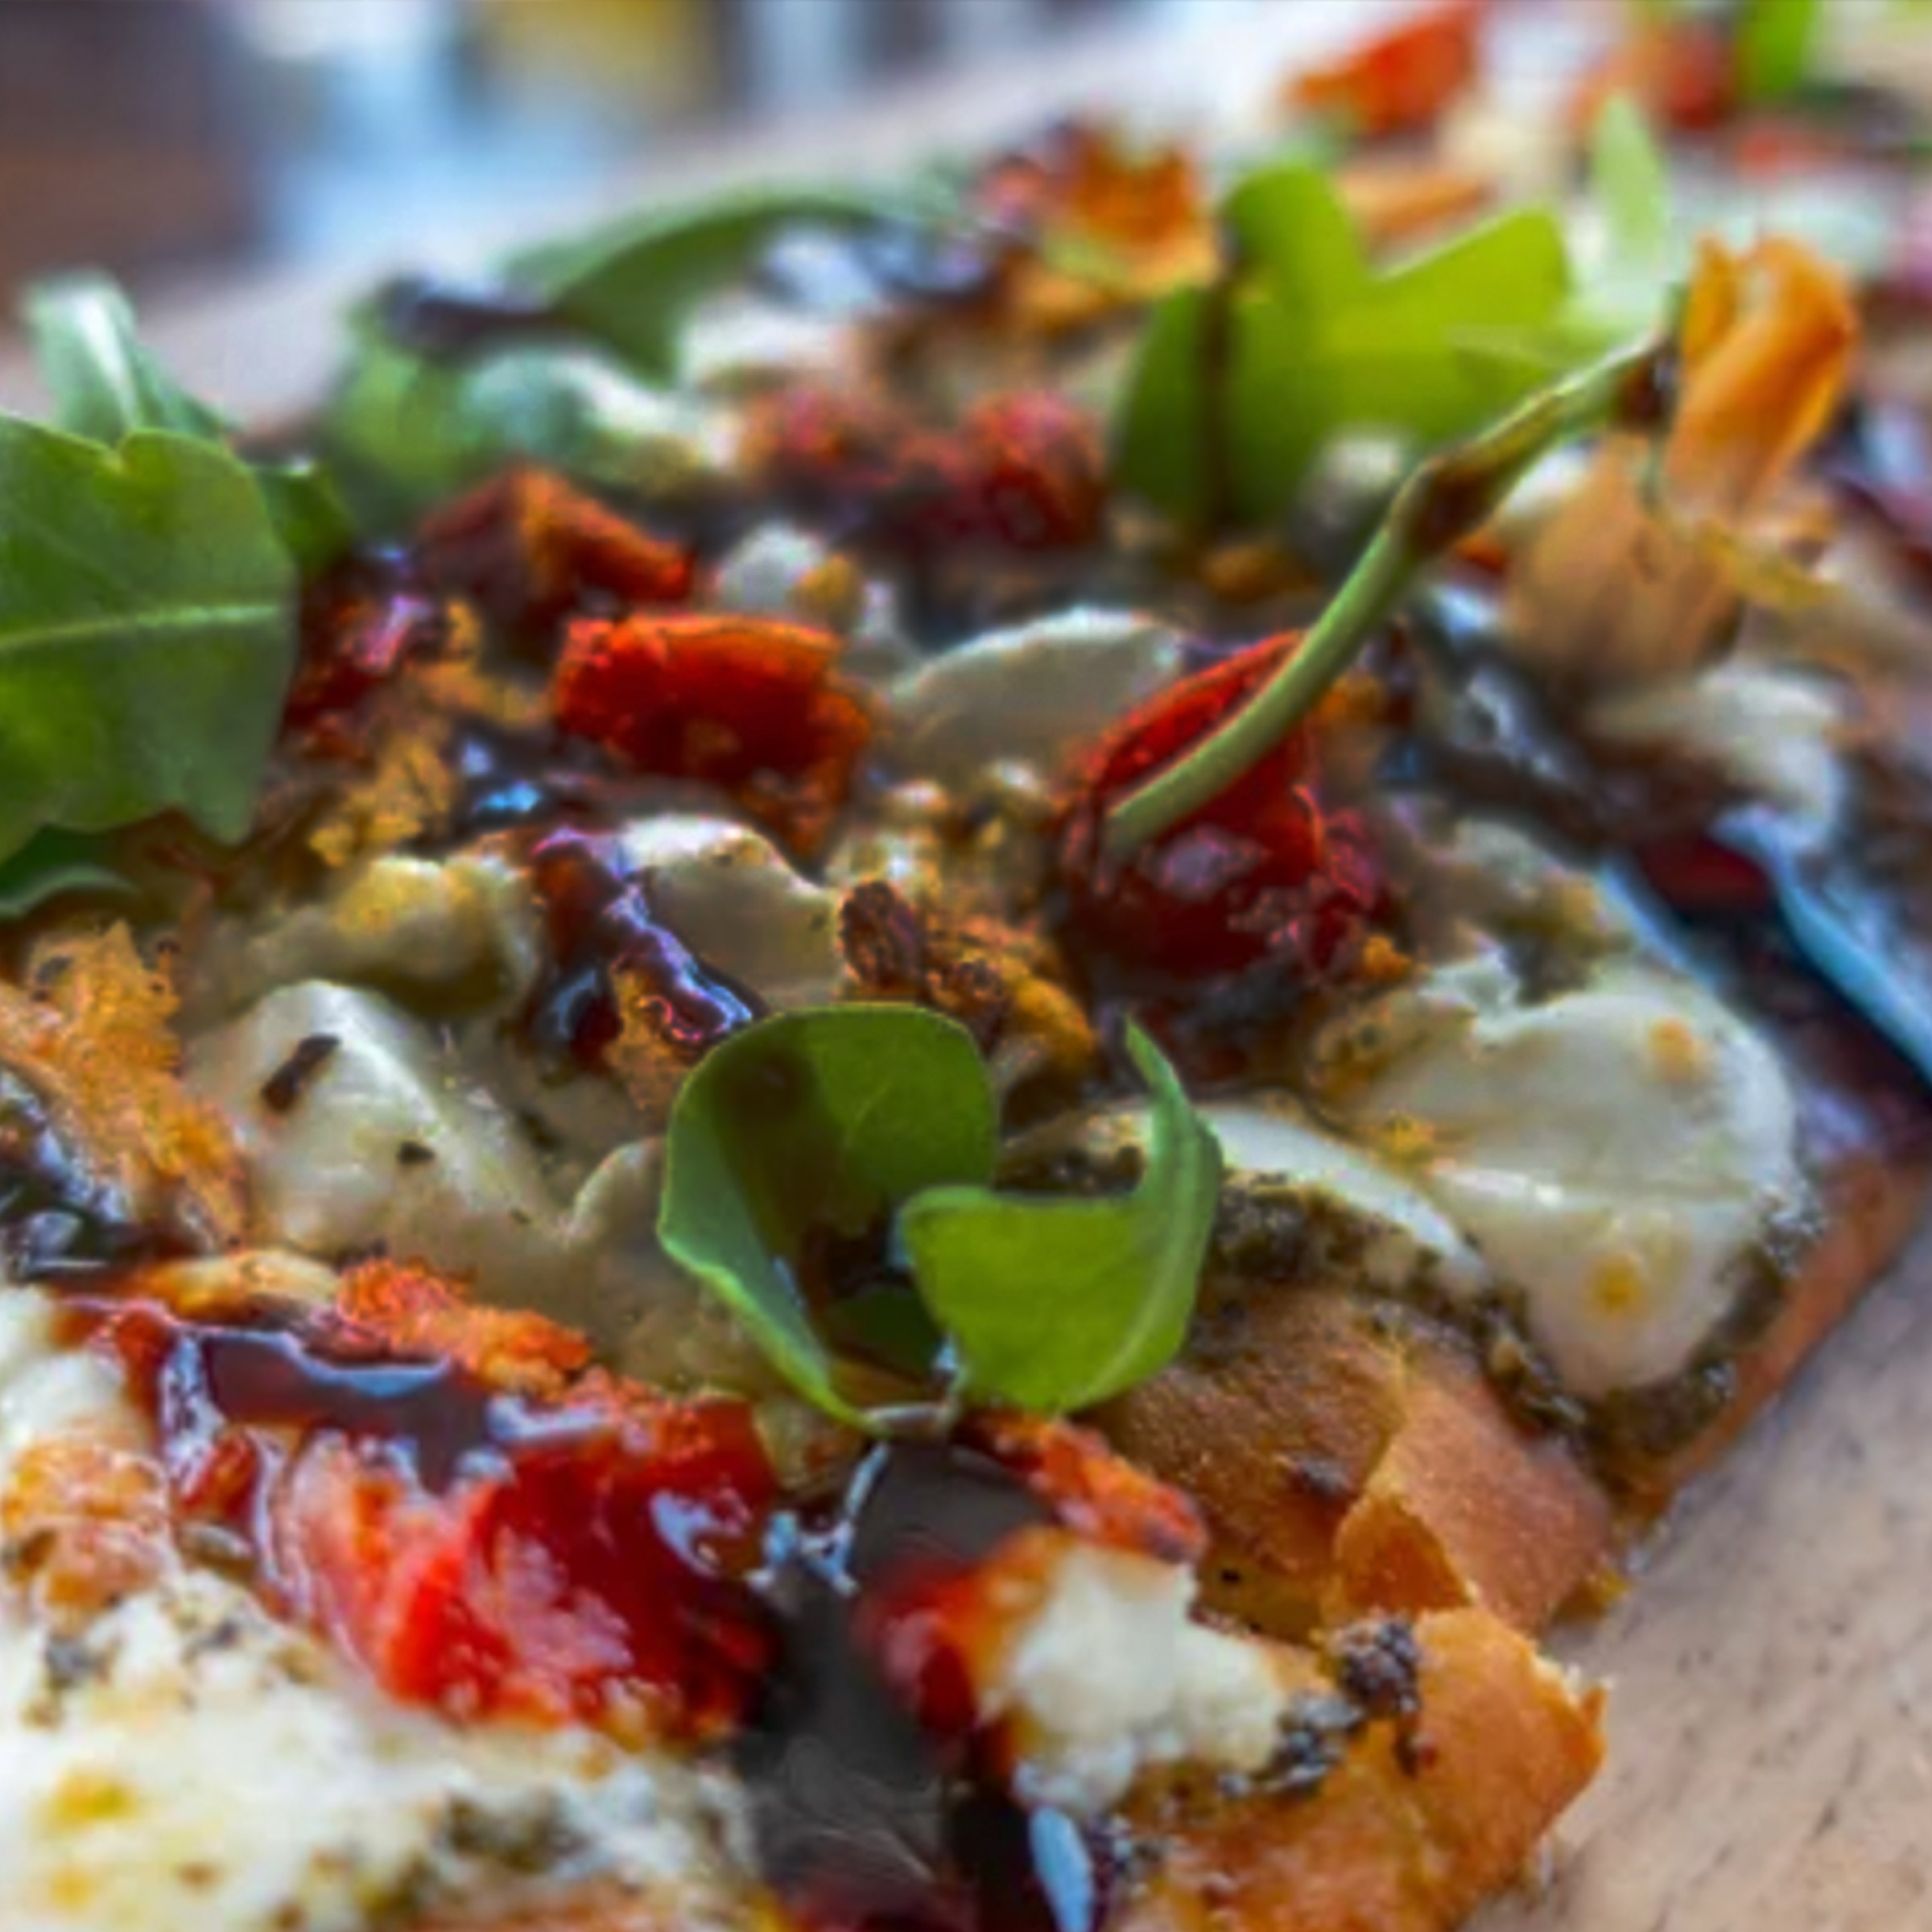 Flatbread Pizza and small plates that pair great with our selection of beer, wine and spirits.